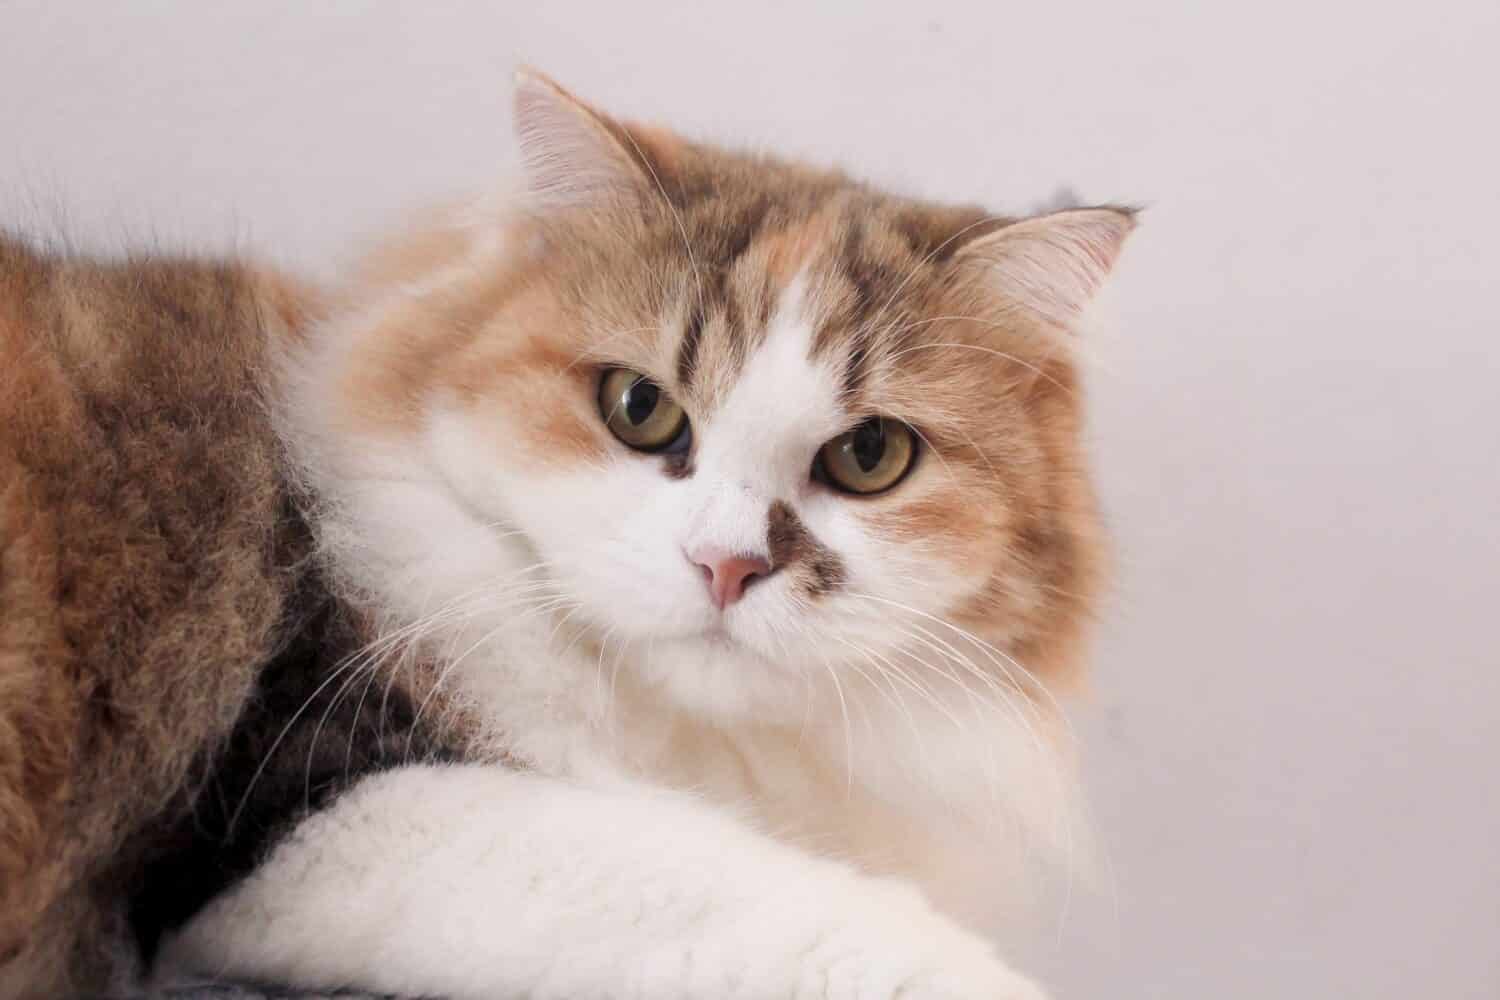 calico siberian forest cat